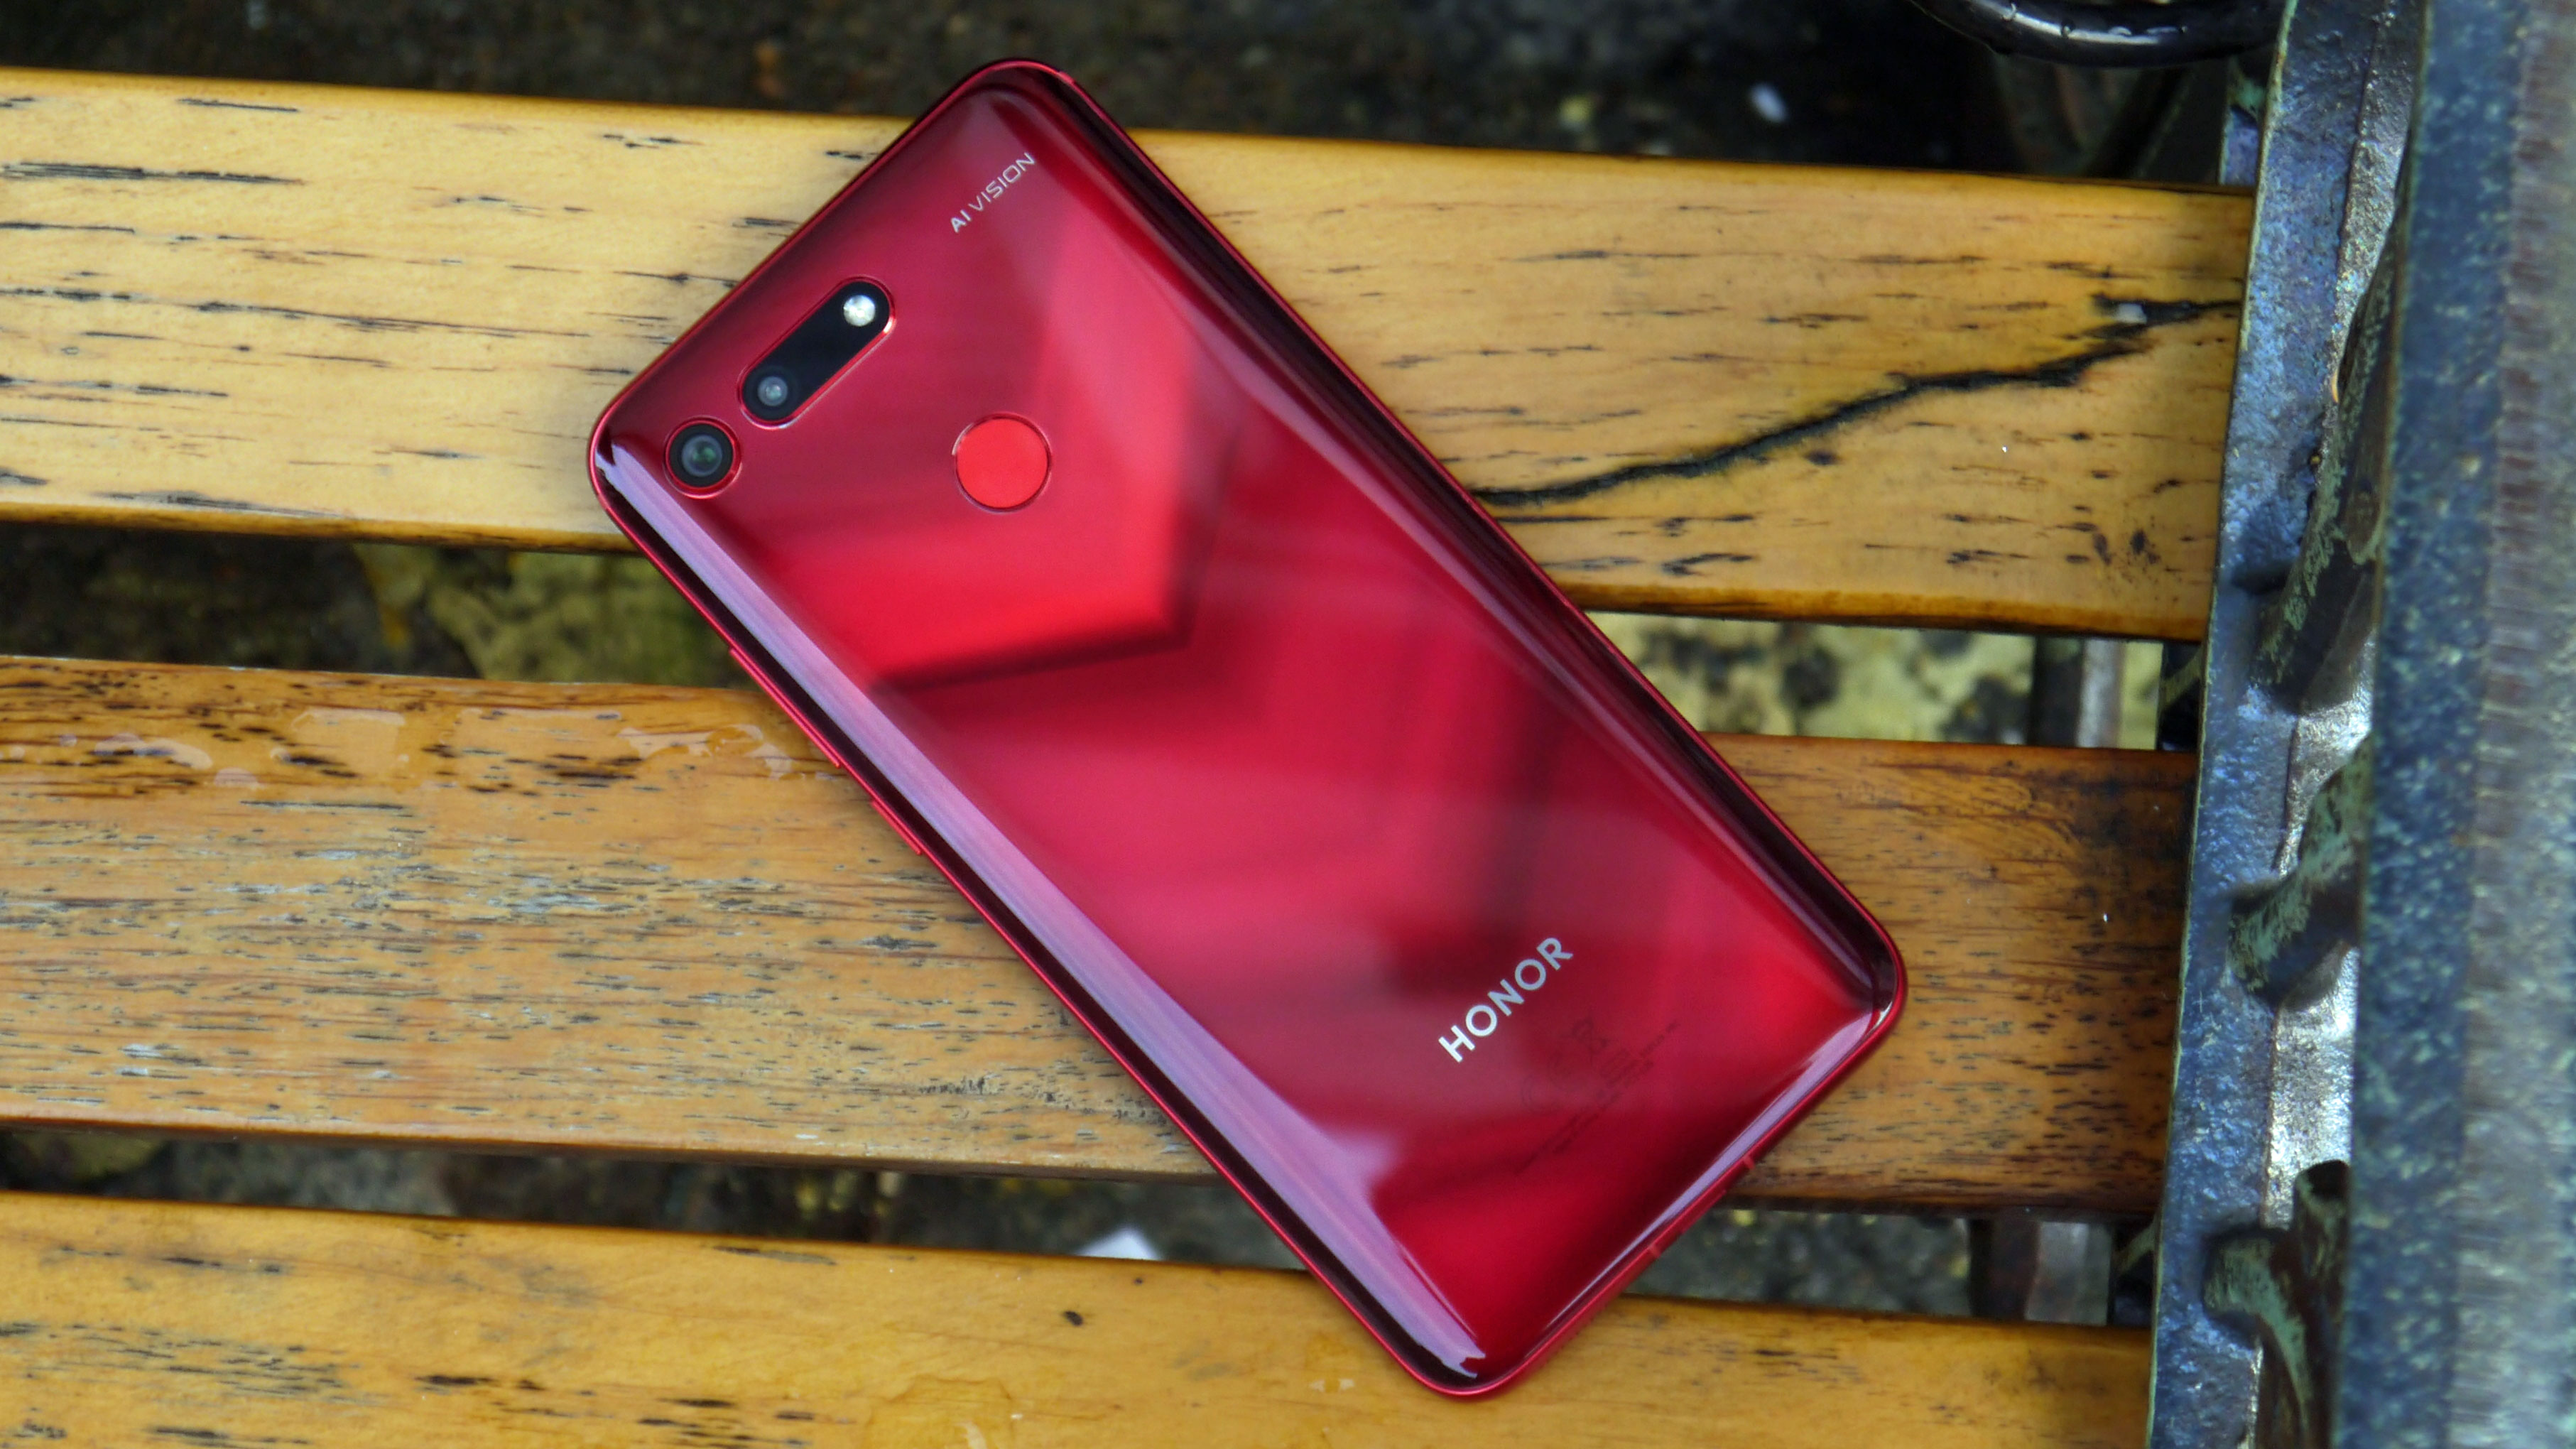 Honor View 20 India price leaked ahead on Janurary 29 launch | TechRadar